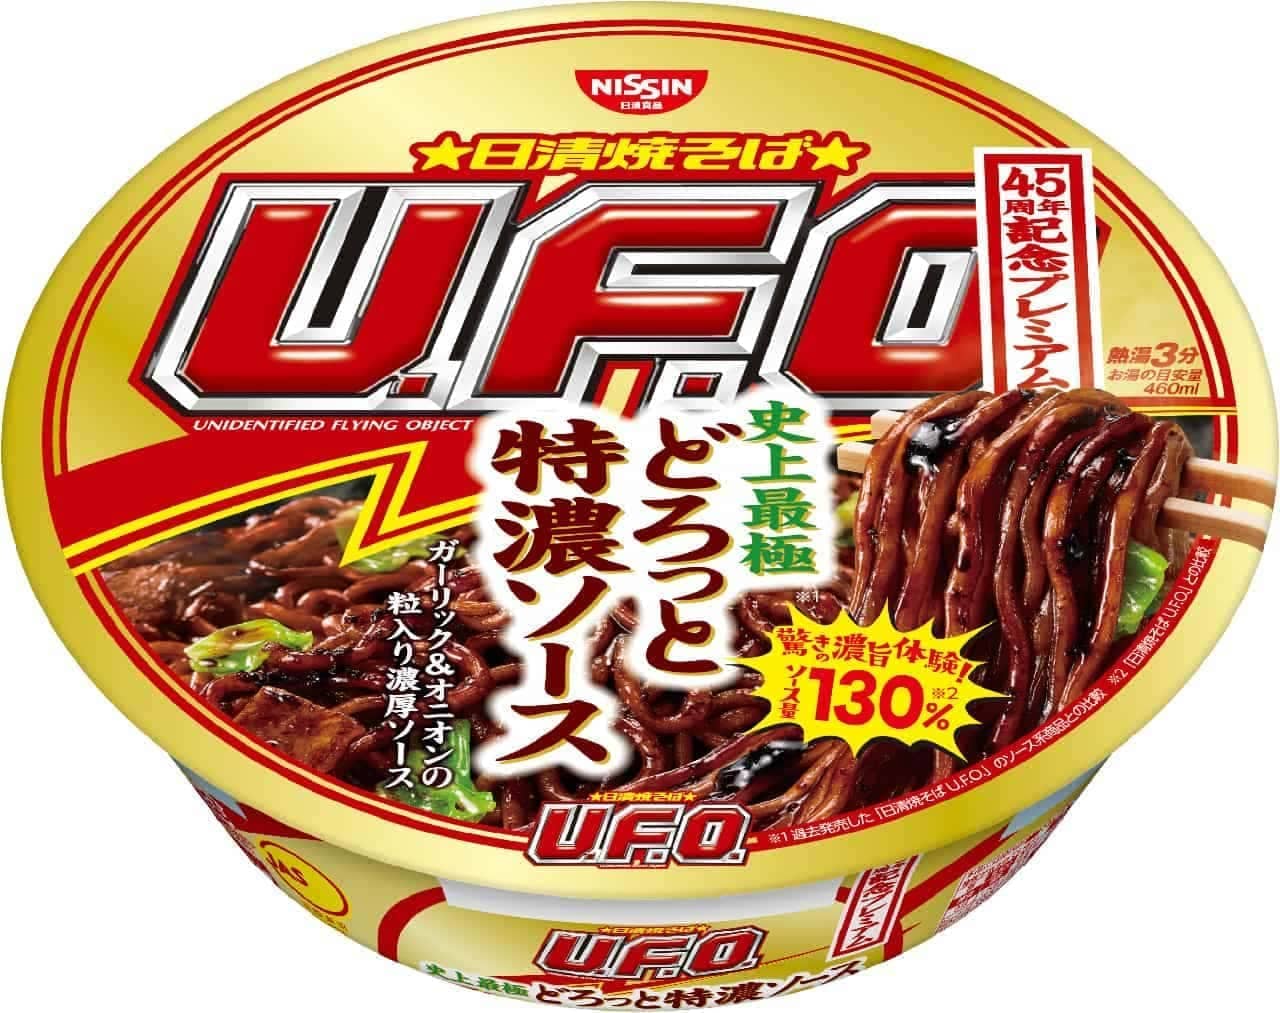 Nissin Foods "Nissin Yakisoba UFO 45th Anniversary Premium The Most Extremely Thick Tokuno Sauce in History"